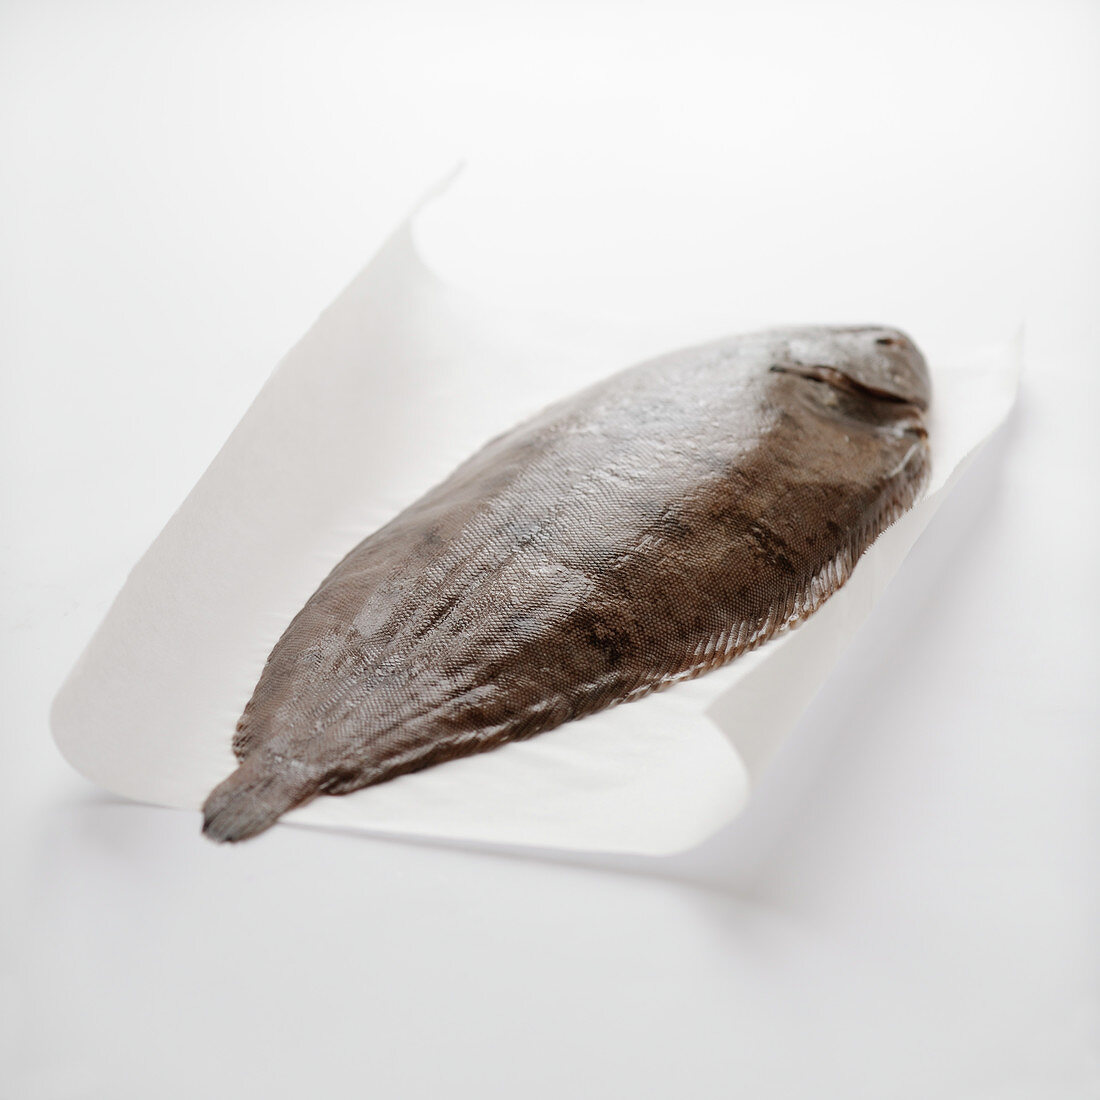 Raw whole sole on a white background